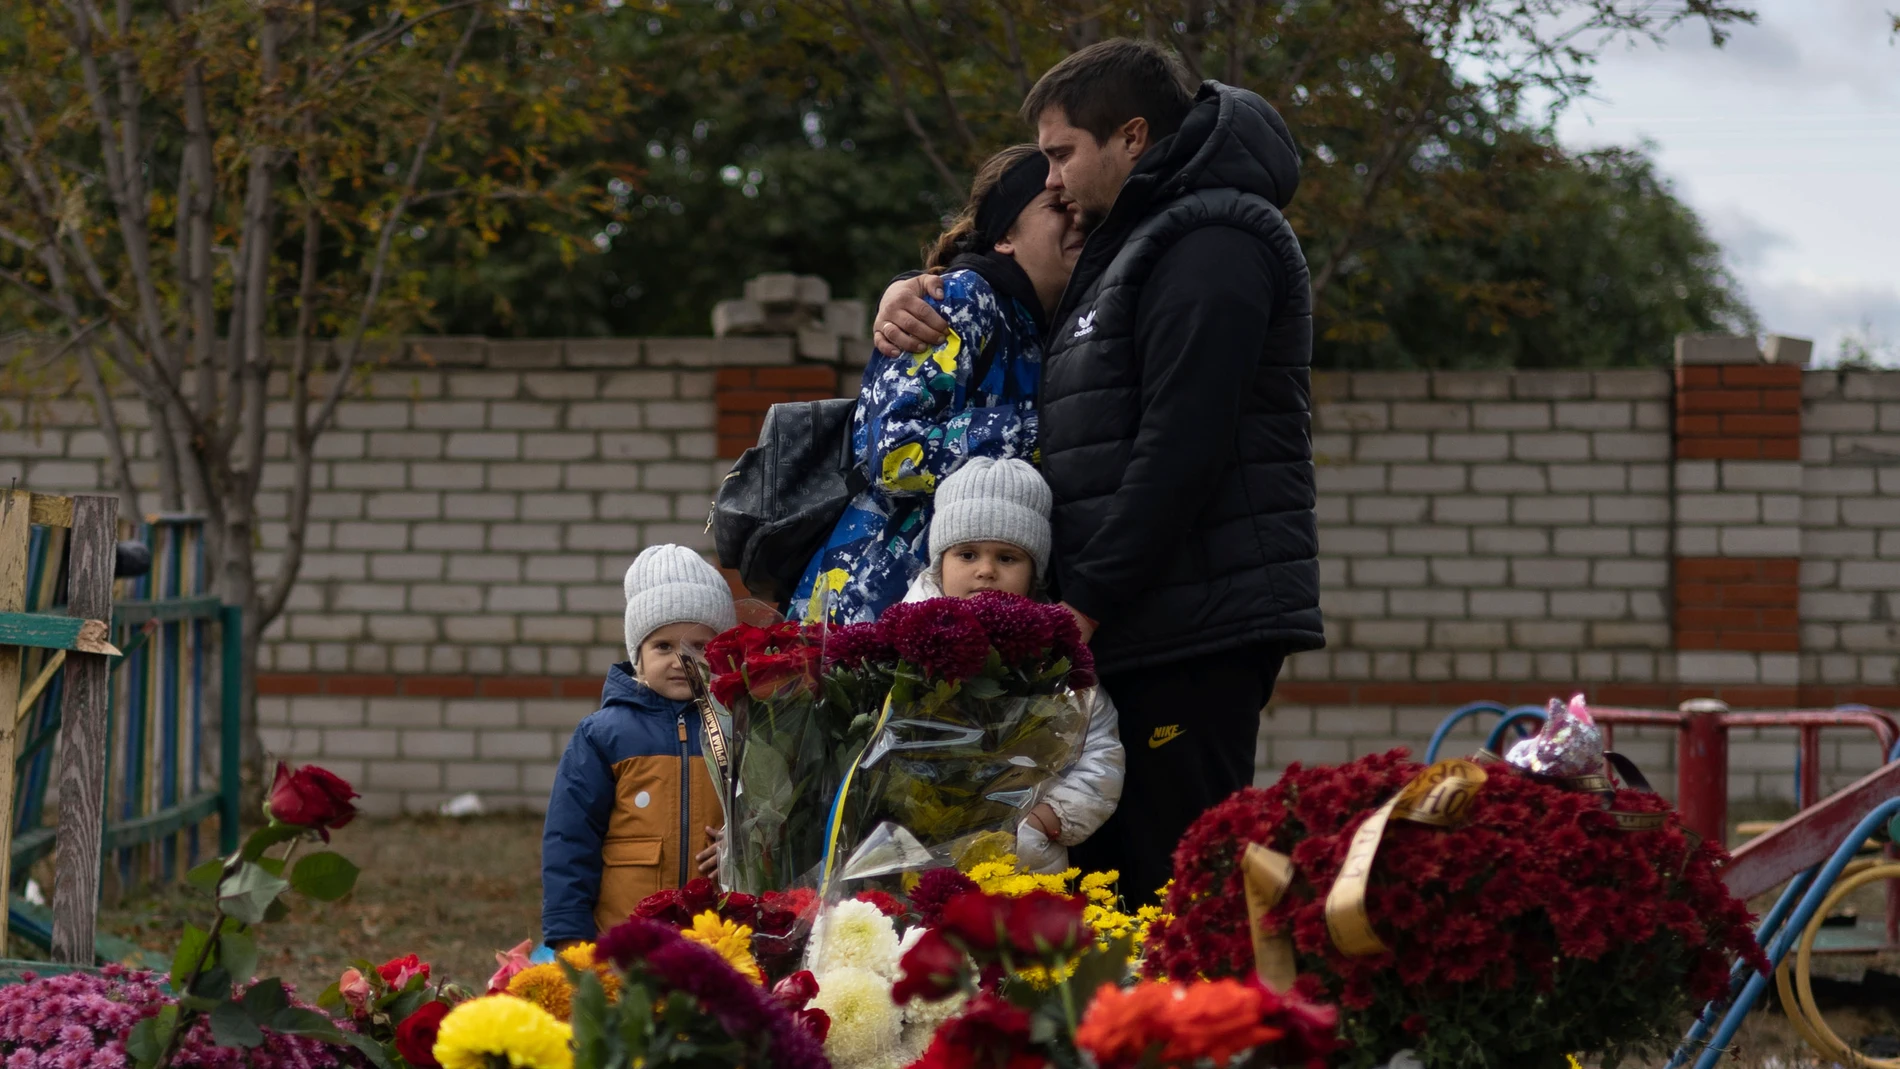 FILE - People react near the memorial for the victims of a Russian rocket attack in the village of Hroza near Kharkiv, Ukraine, Sunday, Oct. 8, 2023. A report by U.N investigators has pointed a finger at Russia as likely being responsible for the deaths of 59 civilians at a village café hit by a missile in eastern Ukraine in early October, in what was one of the deadliest strikes since the Kremlin’s forces launched a full-scale invasion 20 months ago. (AP Photo/Alex Babenko, File)